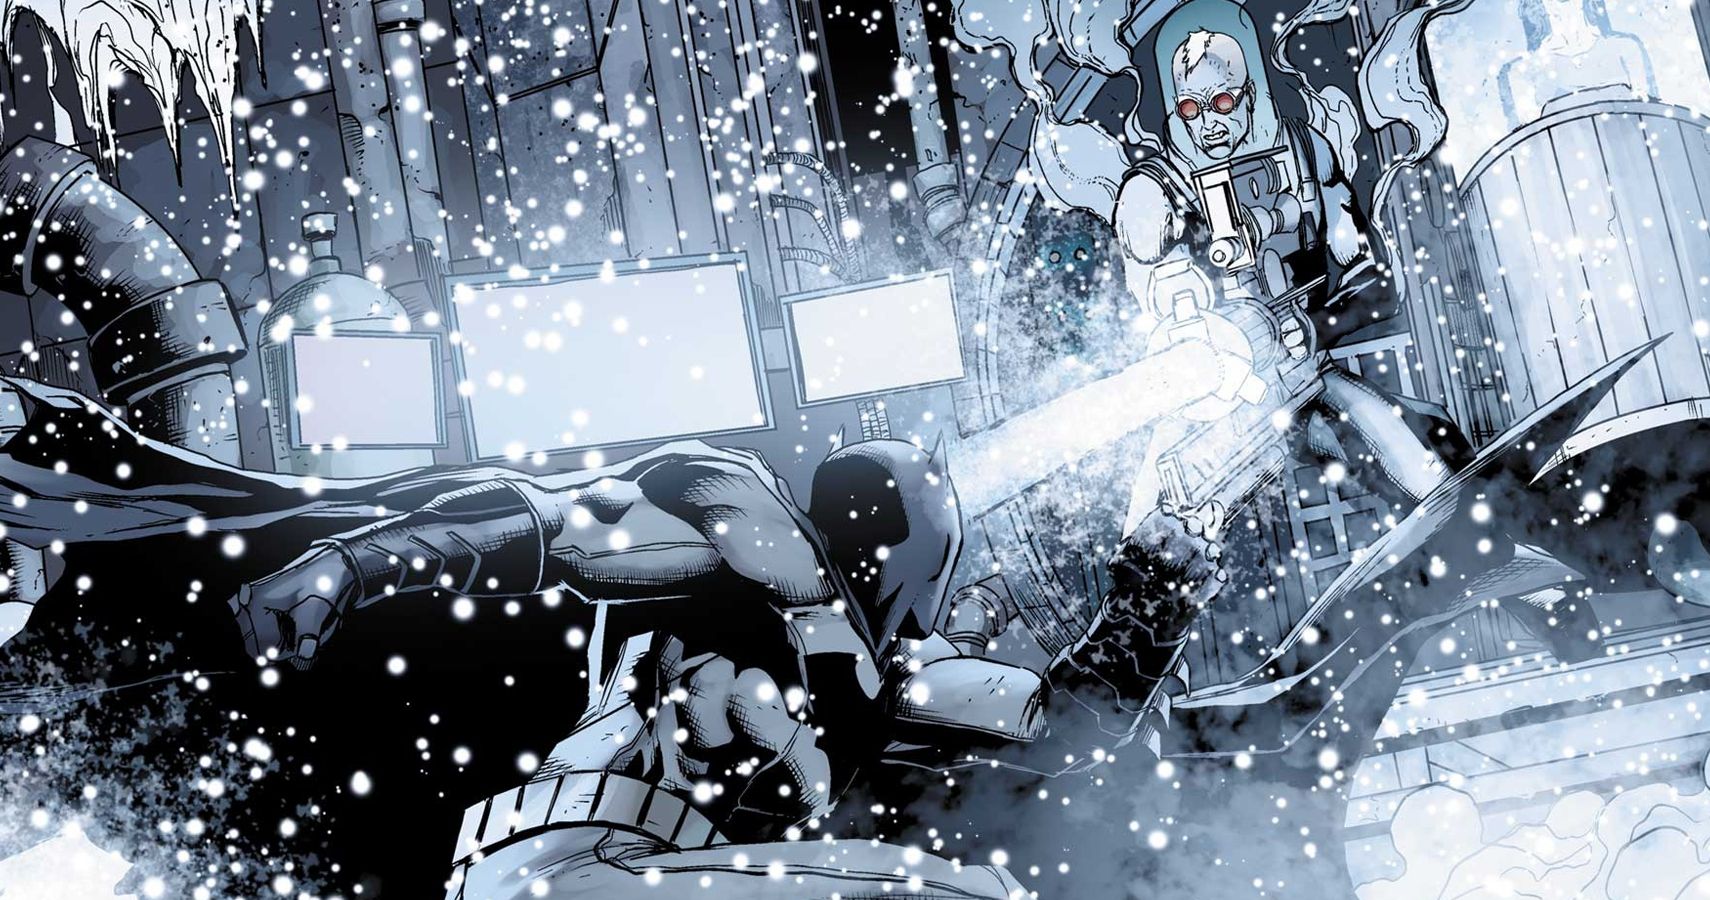 Batman and Mr. Freeze Featured